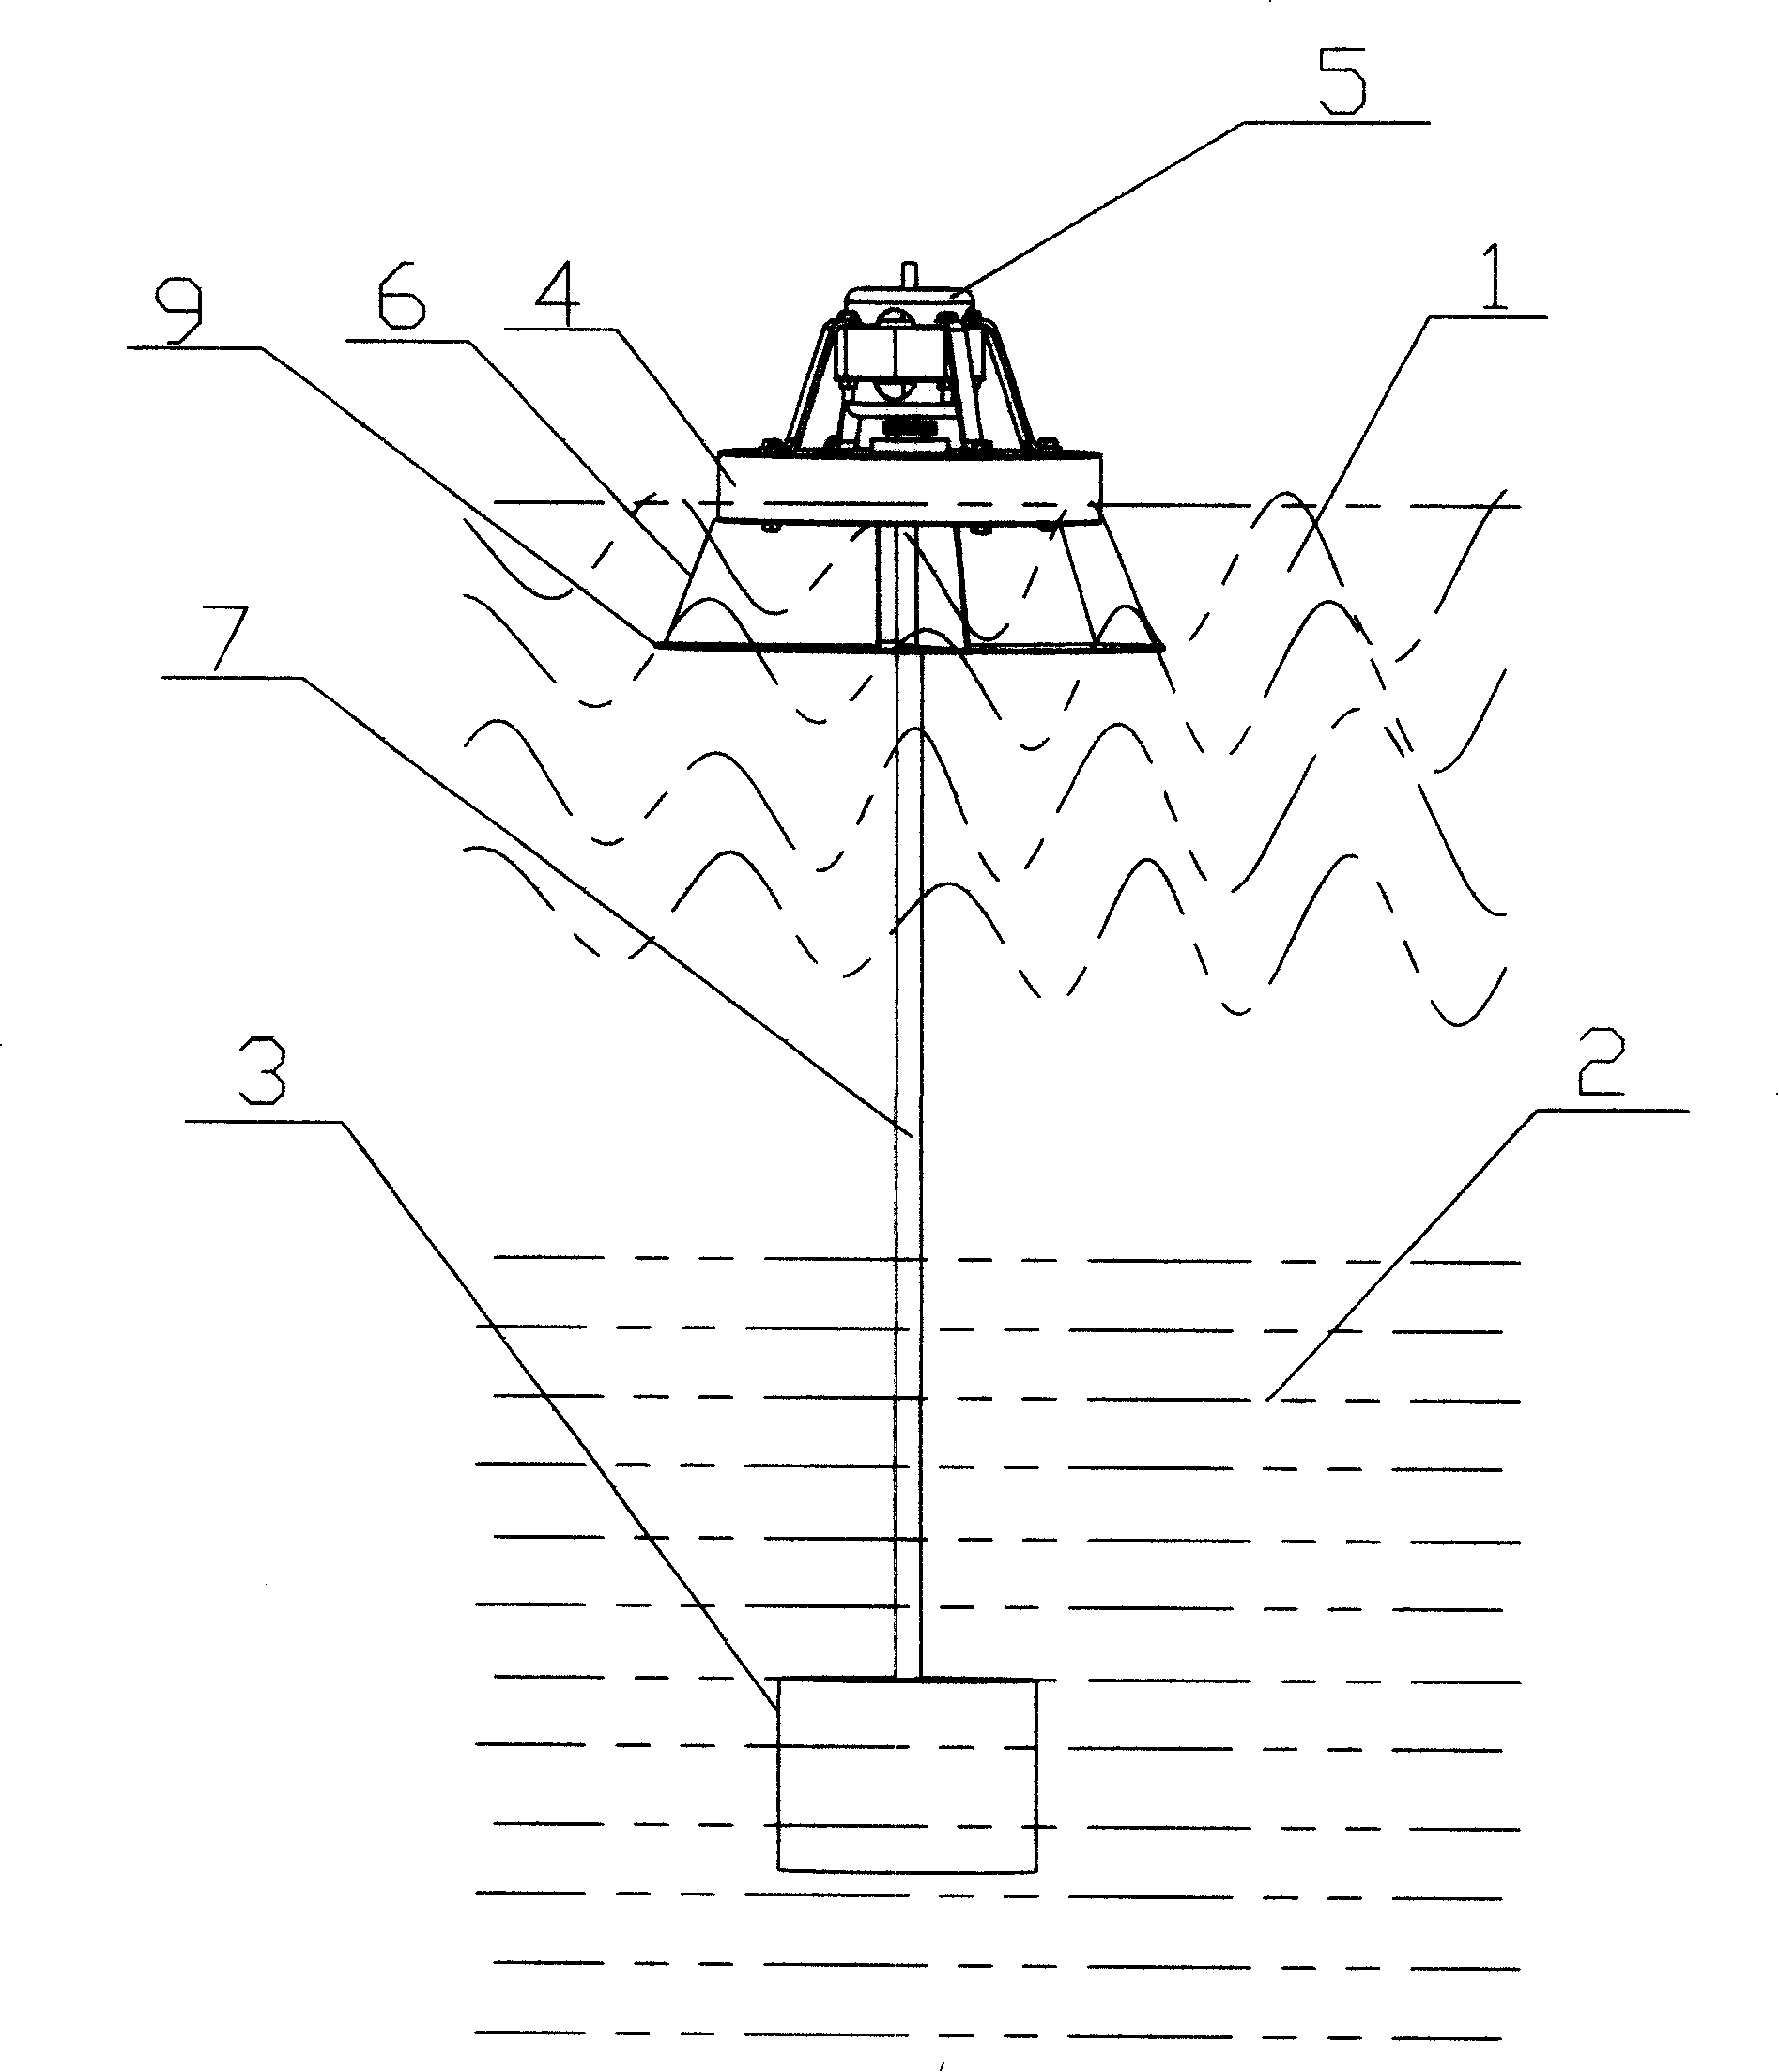 Method and apparatus for generating power using ocean wave energy